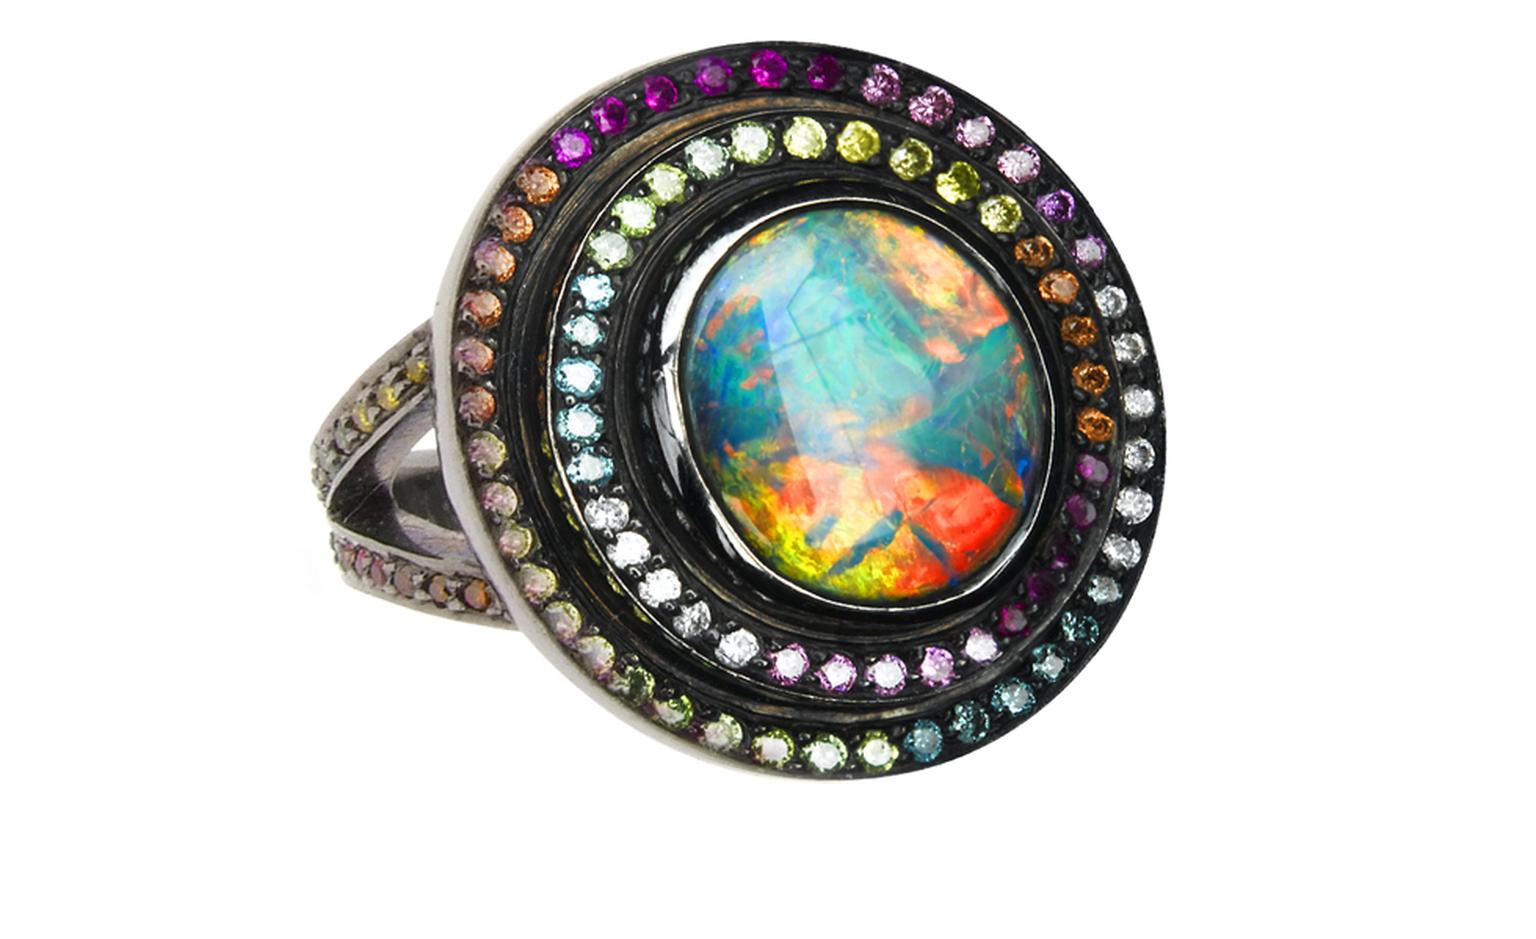 Solange Azagury-Partridge, Opal Fruit ring in blackened white gold and opal. Price from £28,600